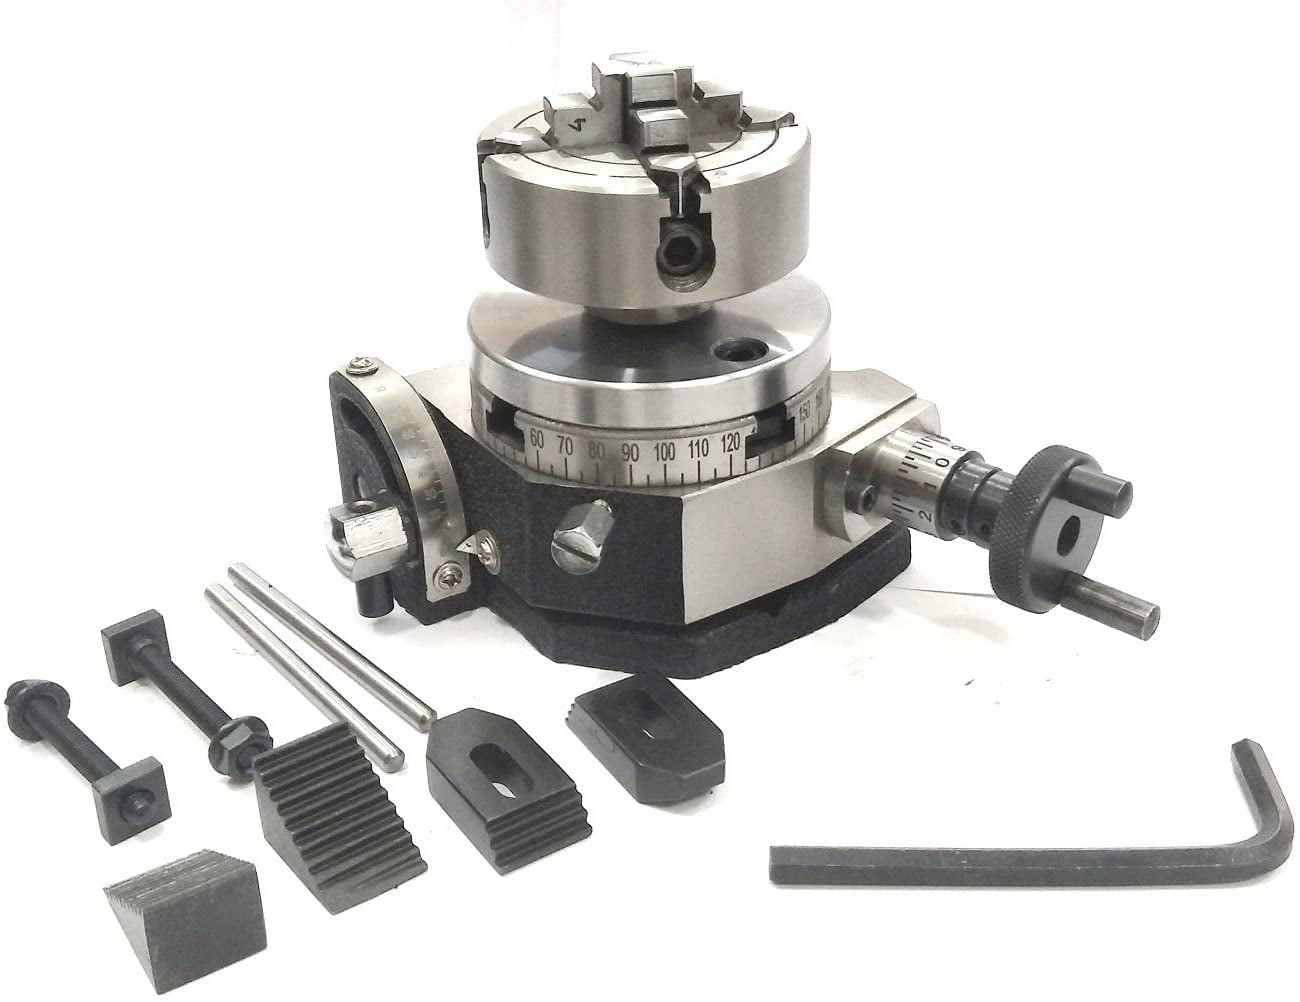 ROTARY TABLE 4"/100MM TILTING WITH 100MM 4 JAW INDEPENDENT CHUCK & CLAMPING KIT 